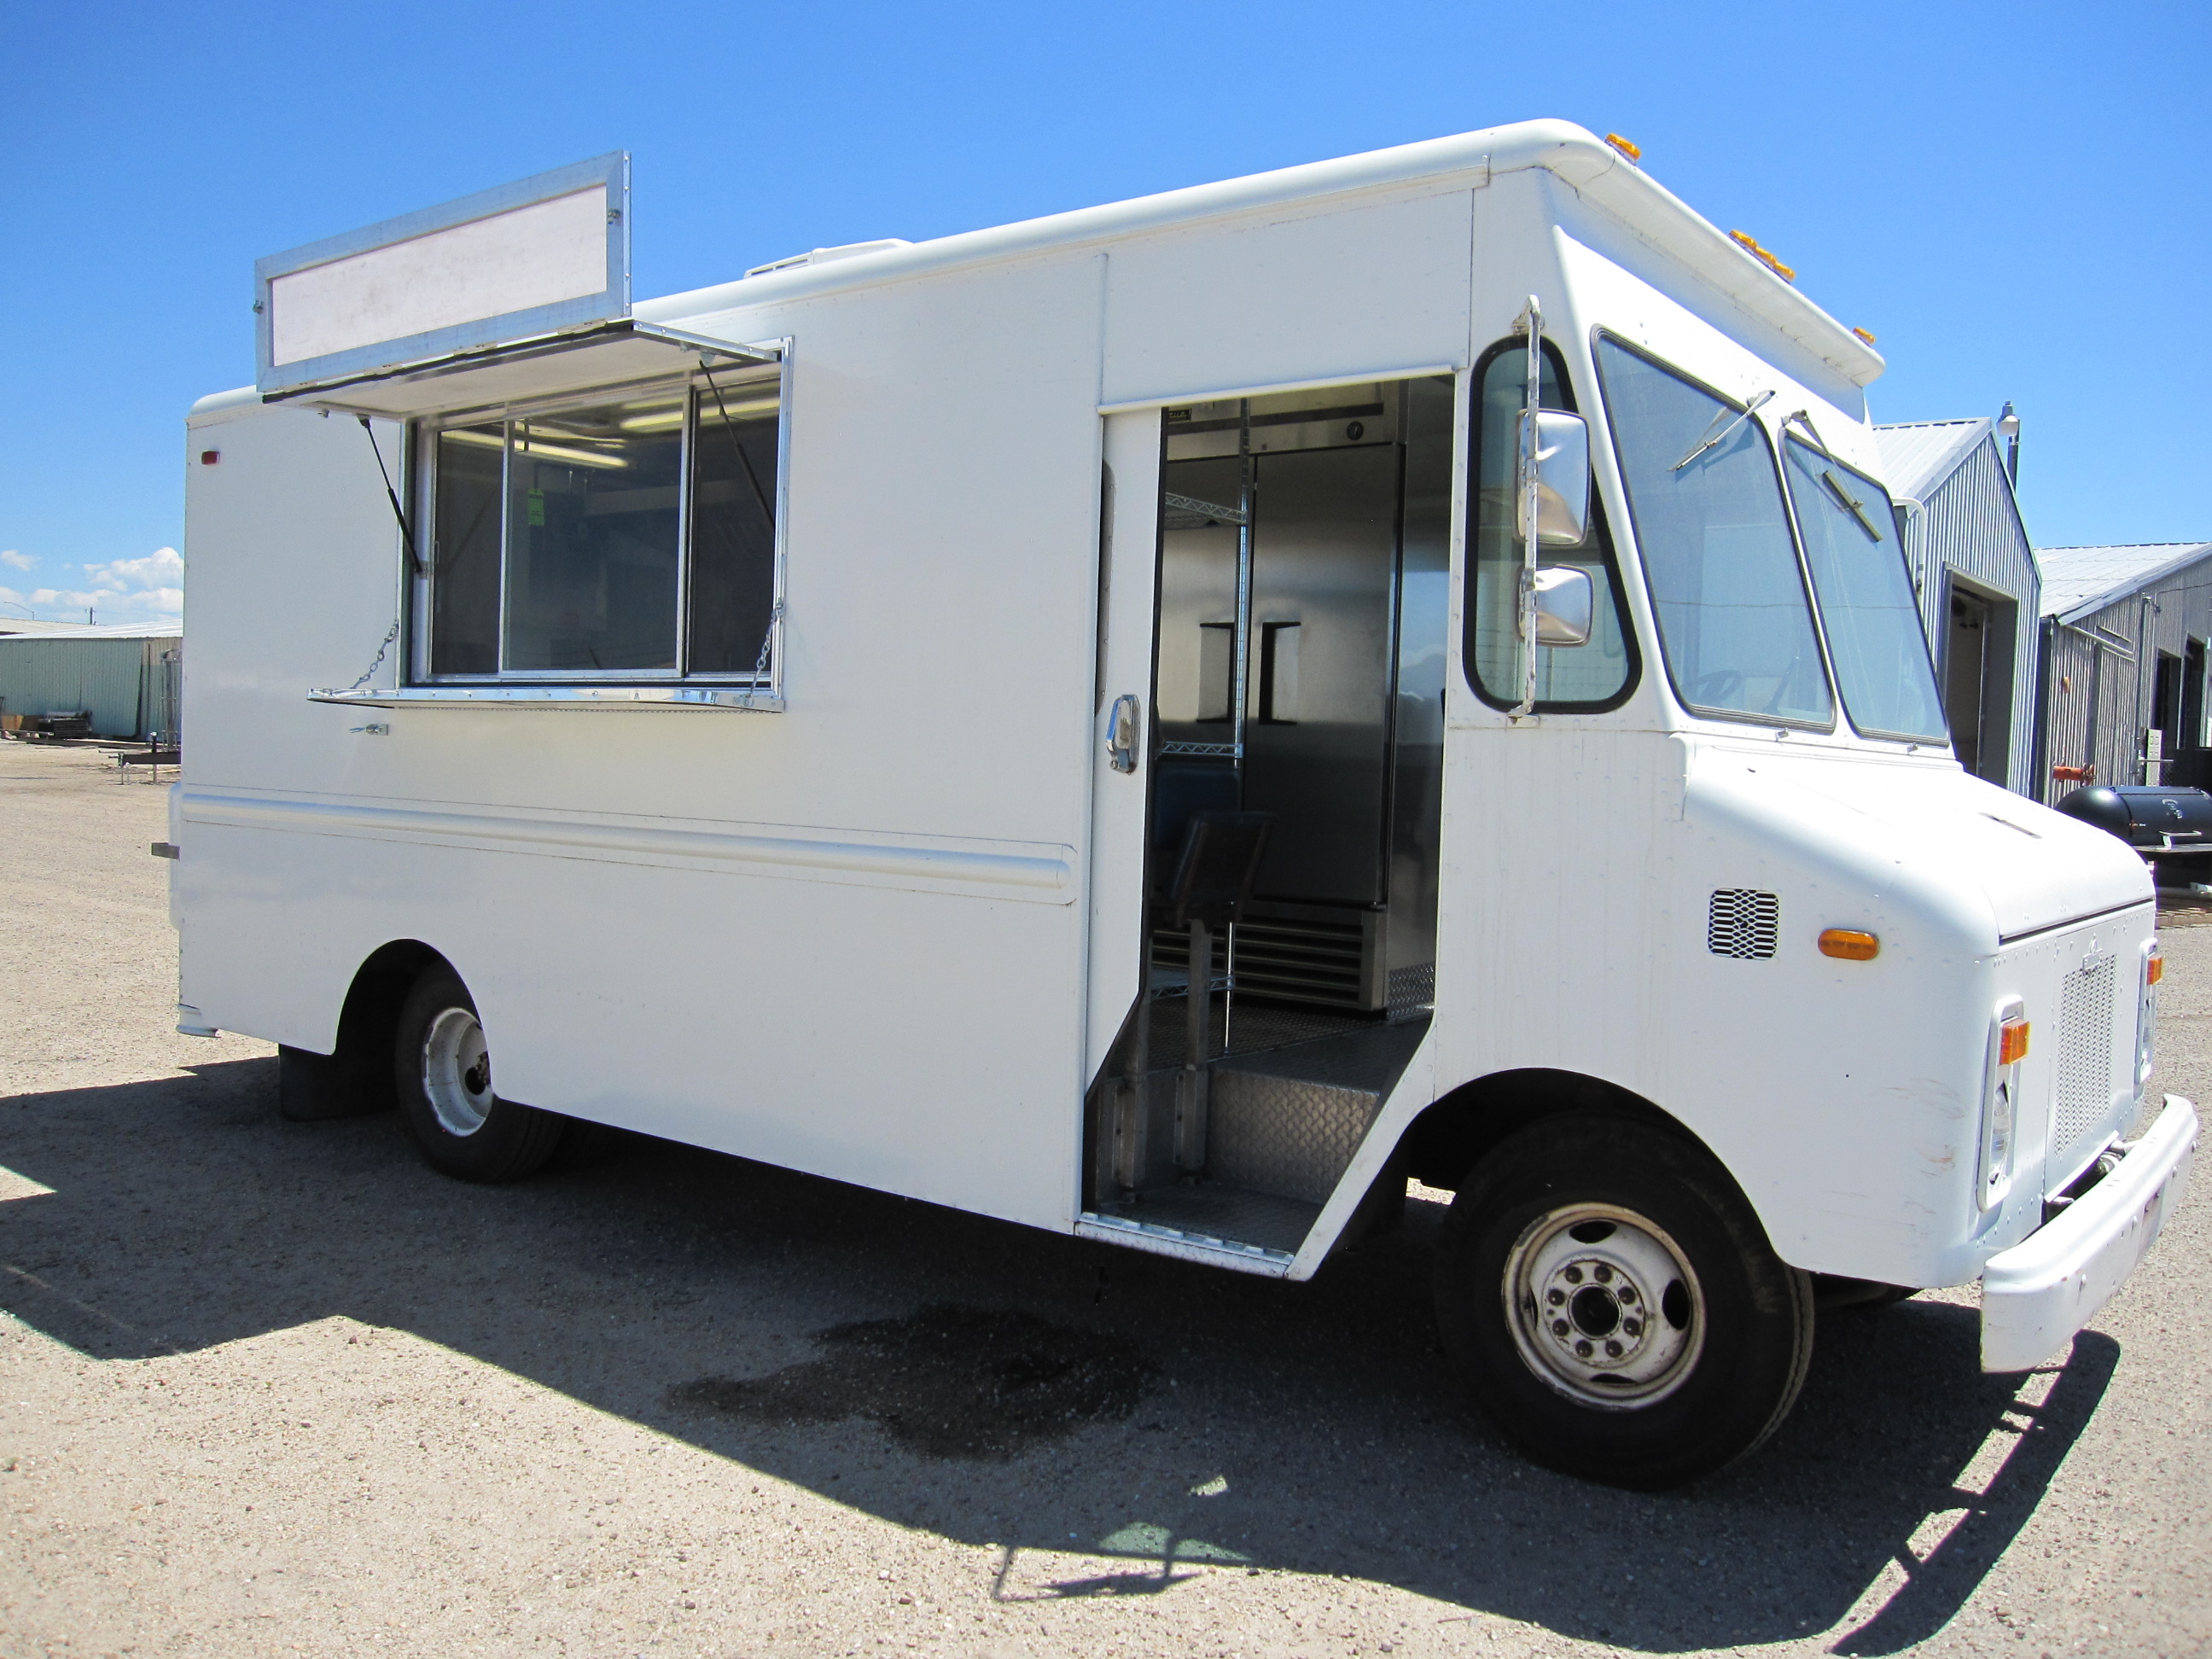 Food Truck Business - Business Planning Reports